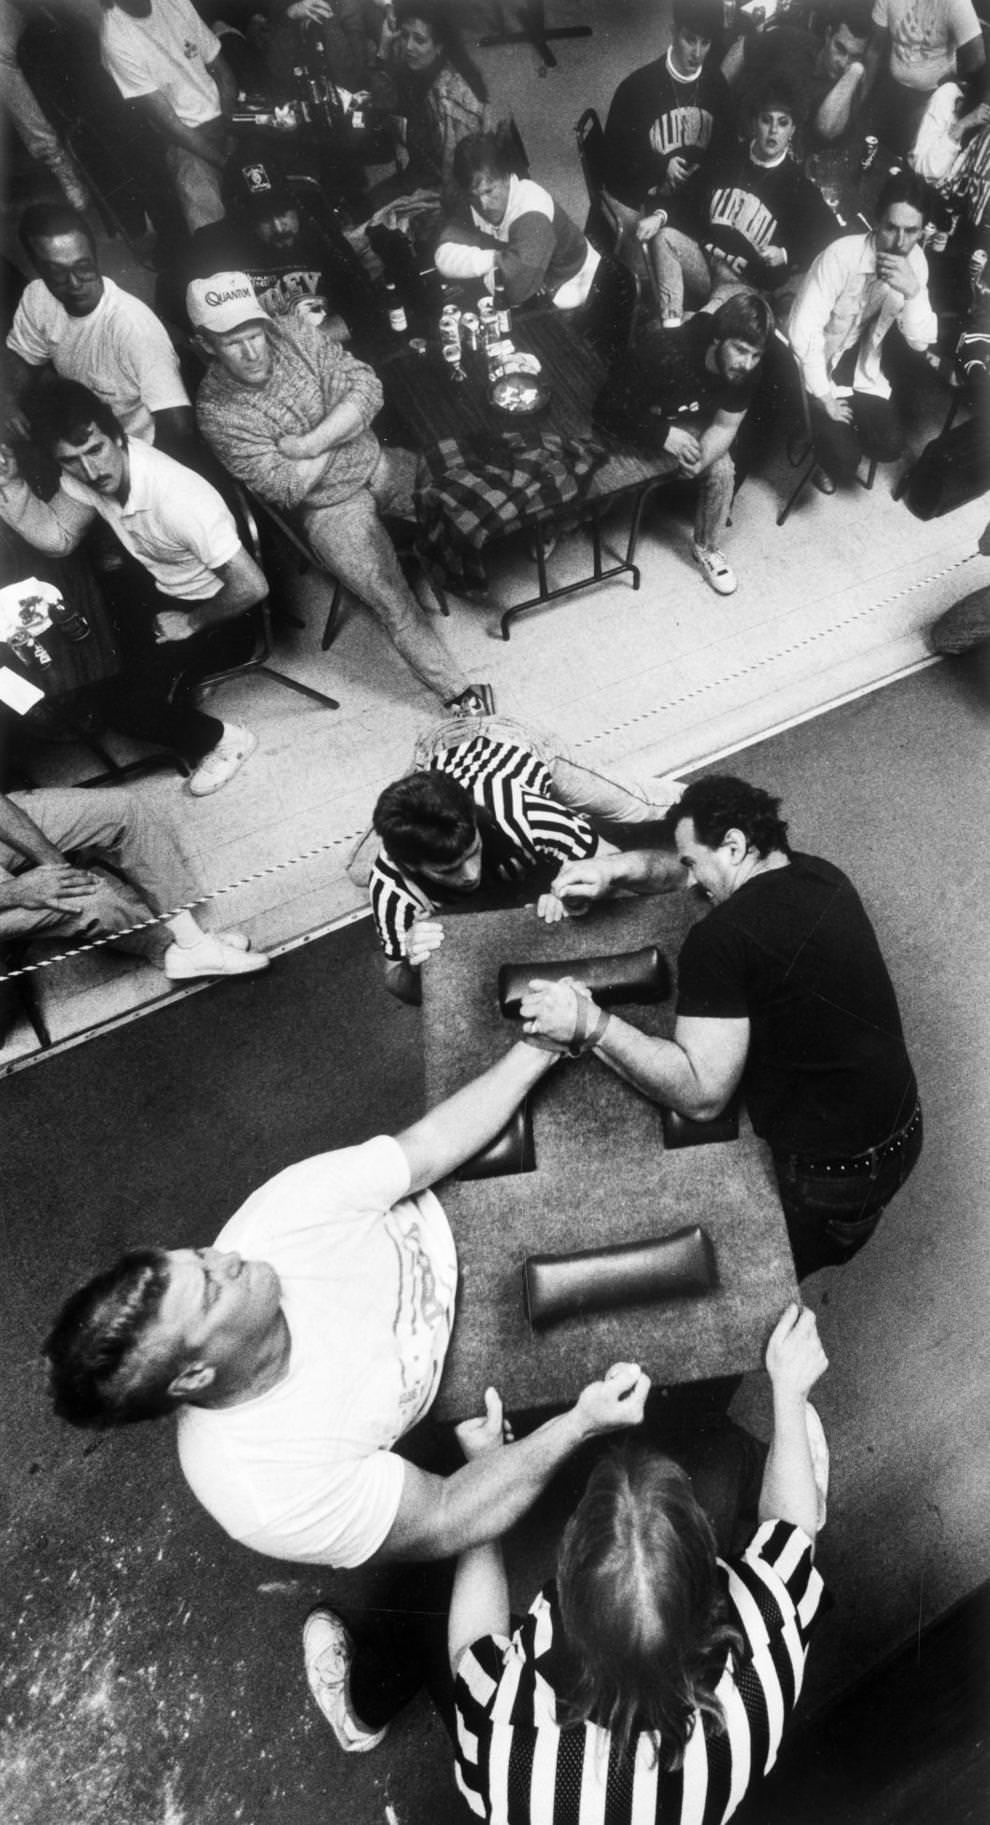 Tracy Ward (left) and John Ottarski squared off in the left-handed competition at the Virginia Classic Arm Wrestling Championship, held at Joe’s Place in Petersburg, 1991